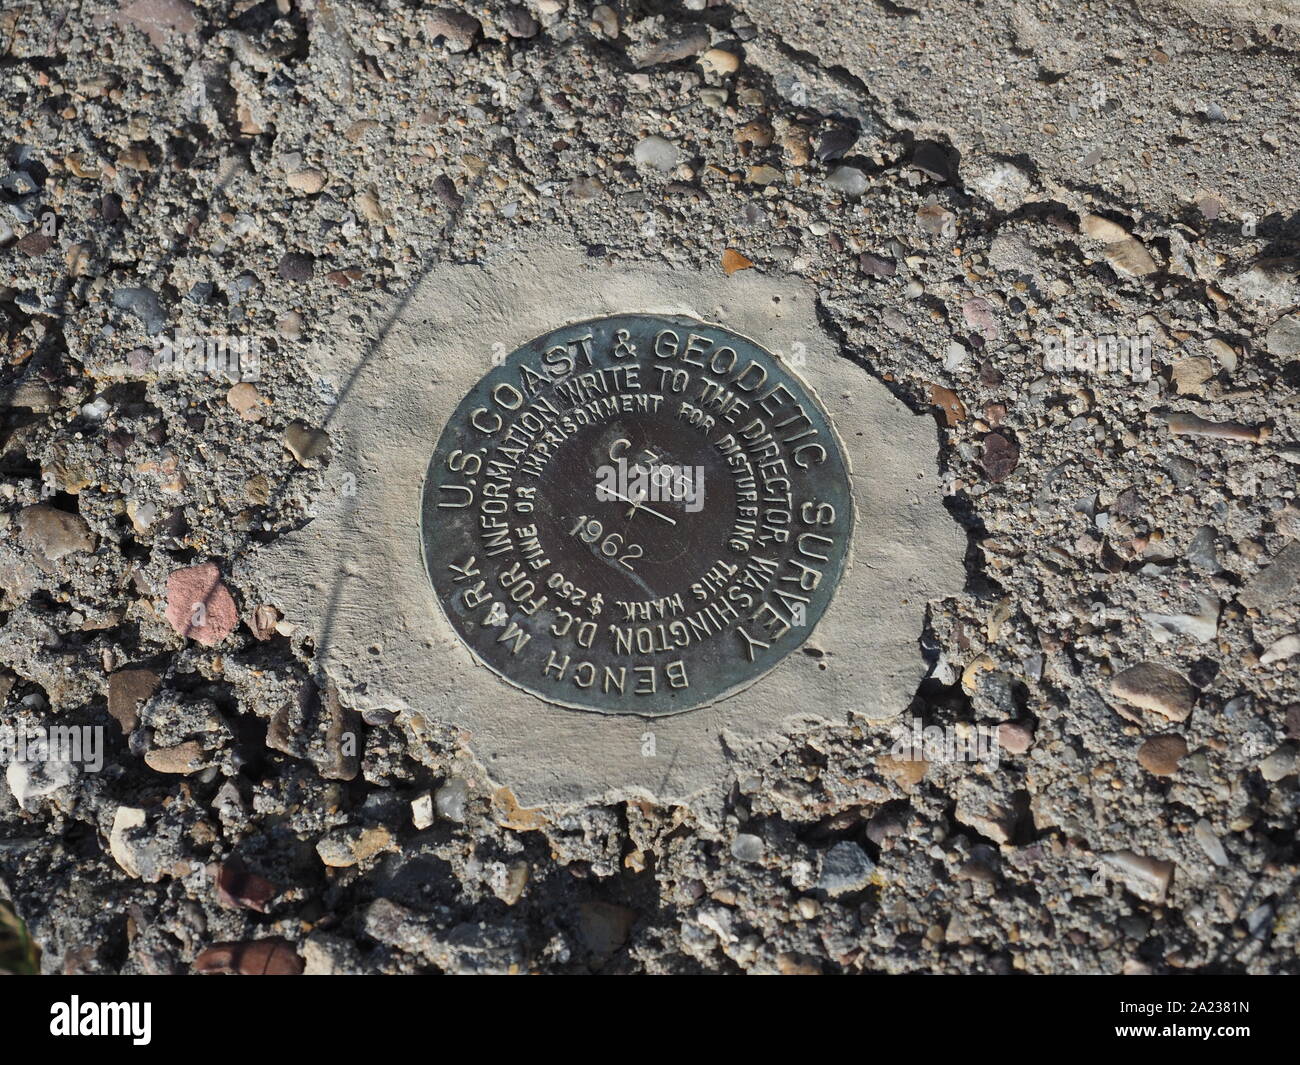 United States Coast and Geodetic Survey marker embedded in the ground Stock Photo